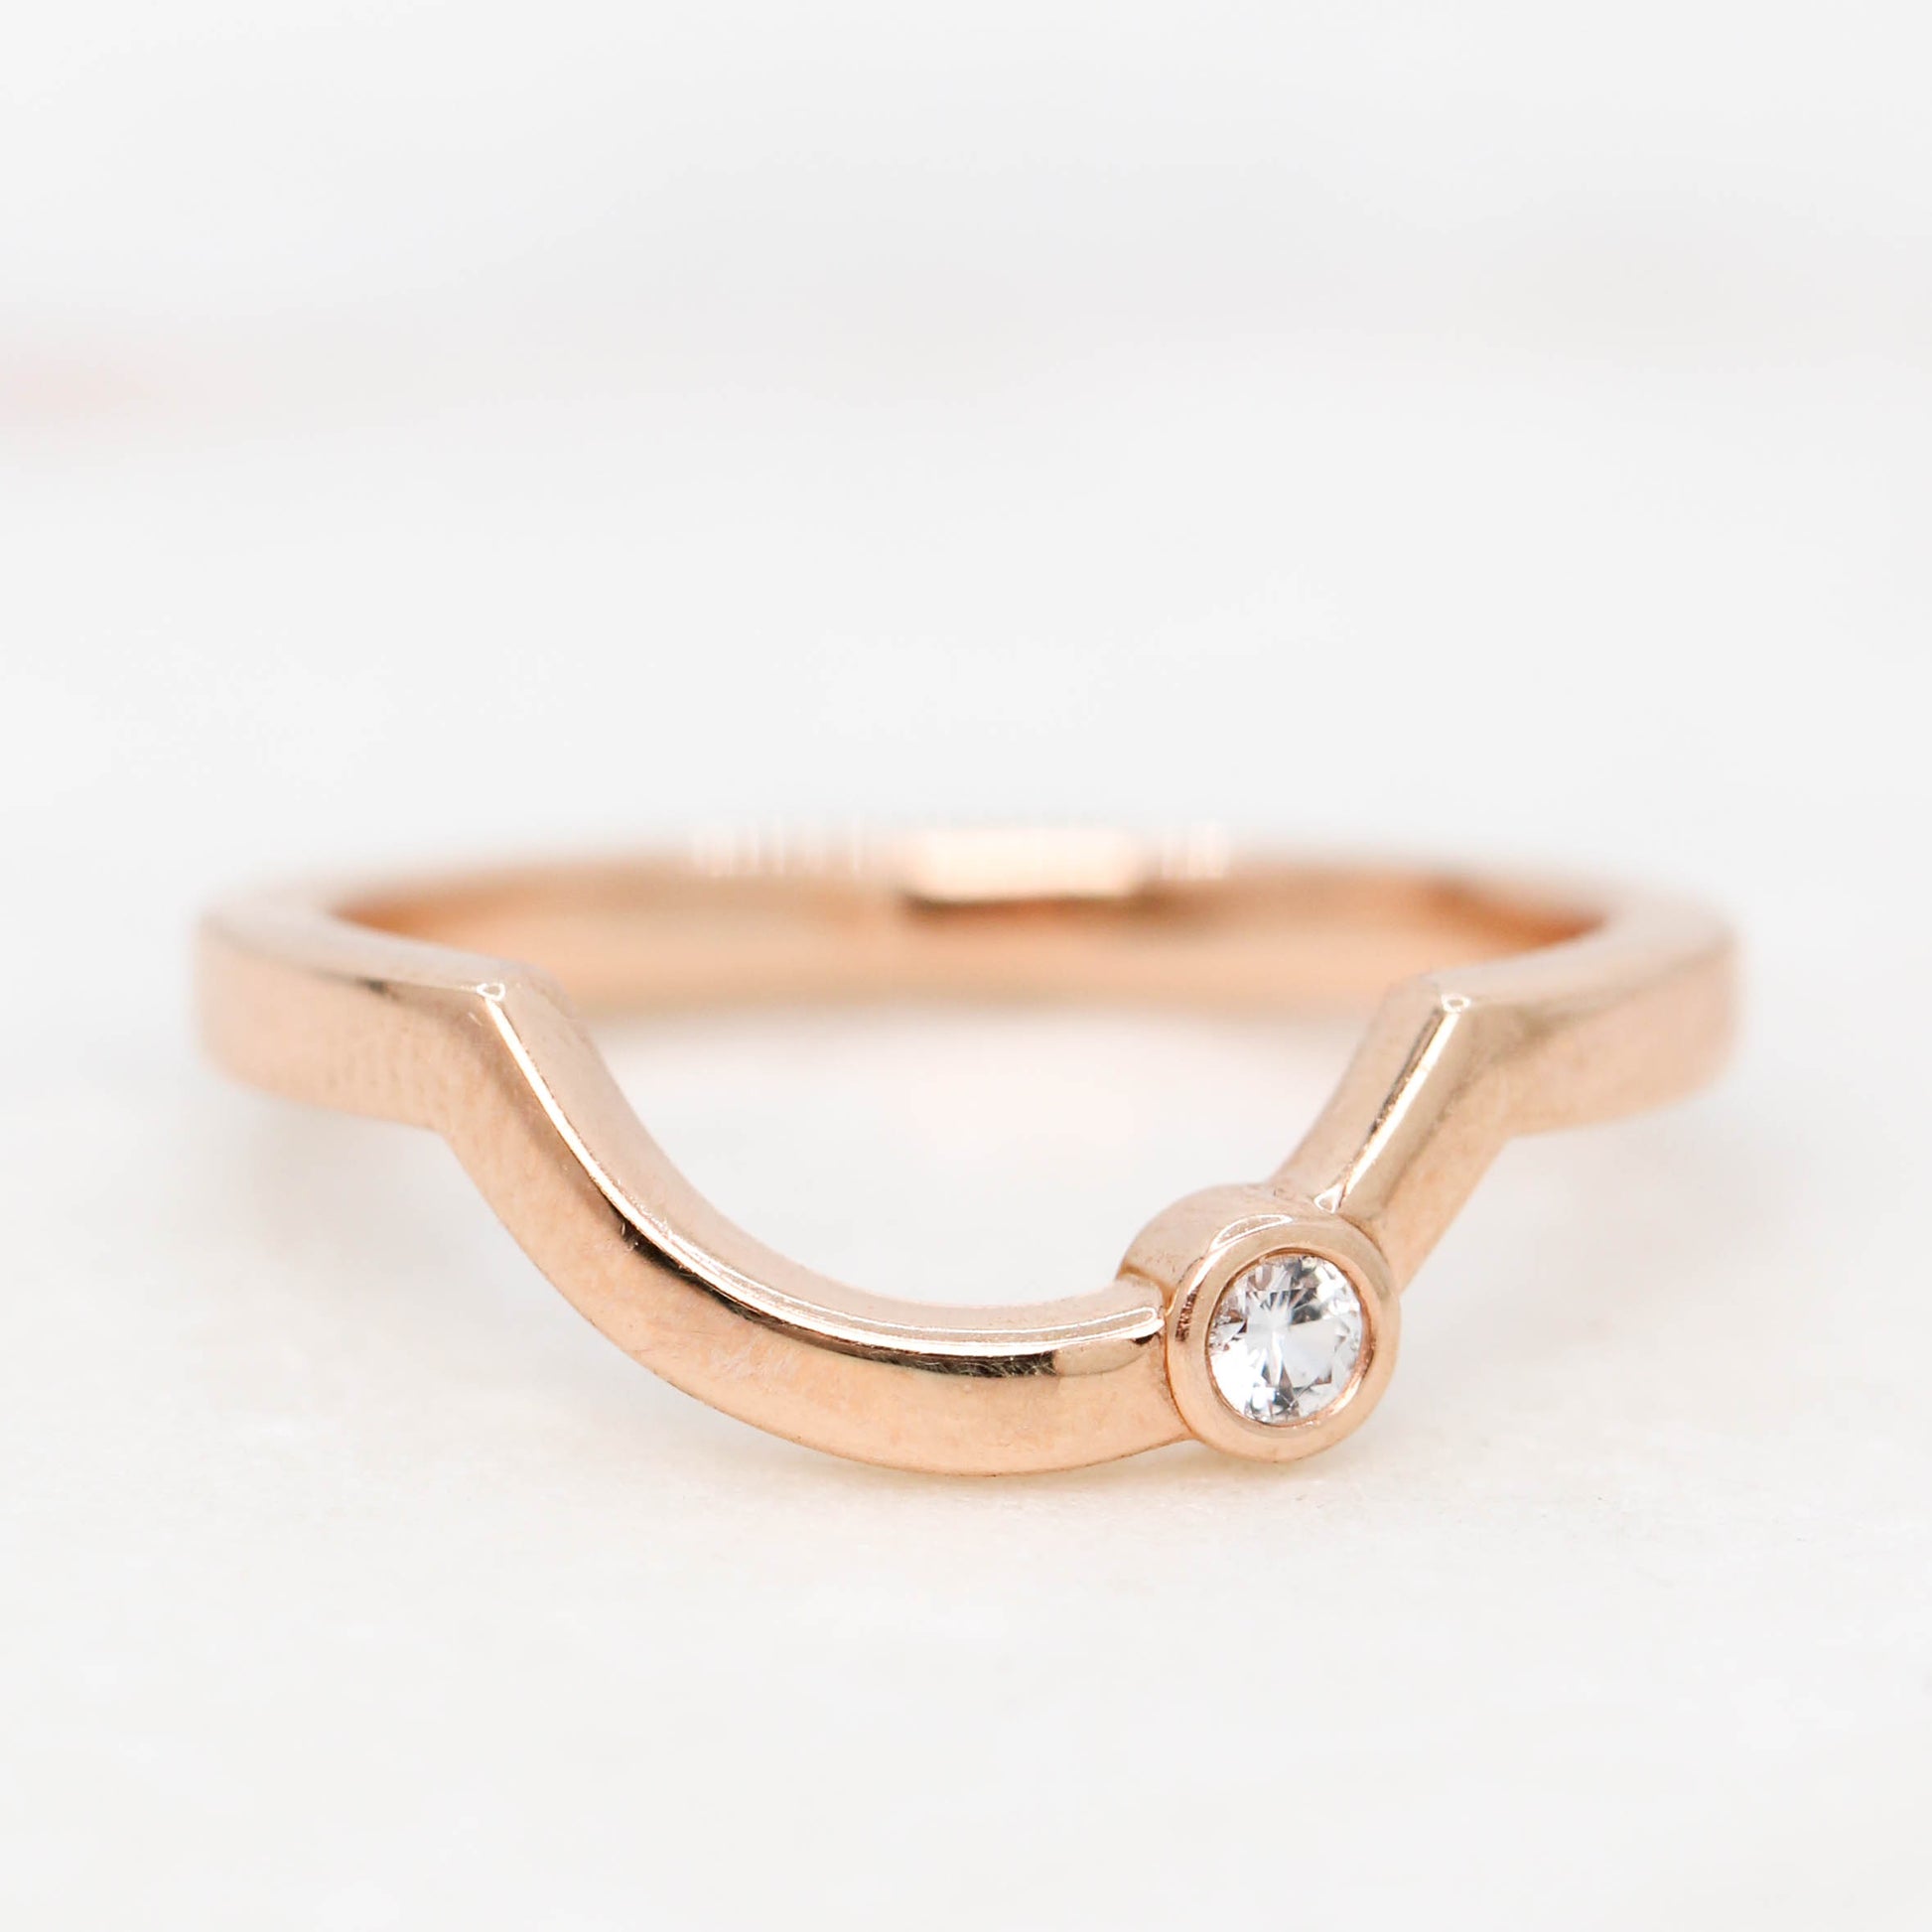 Archie wedding band - customized contour band - 14k gold of your choice - Midwinter Co. Alternative Bridal Rings and Modern Fine Jewelry